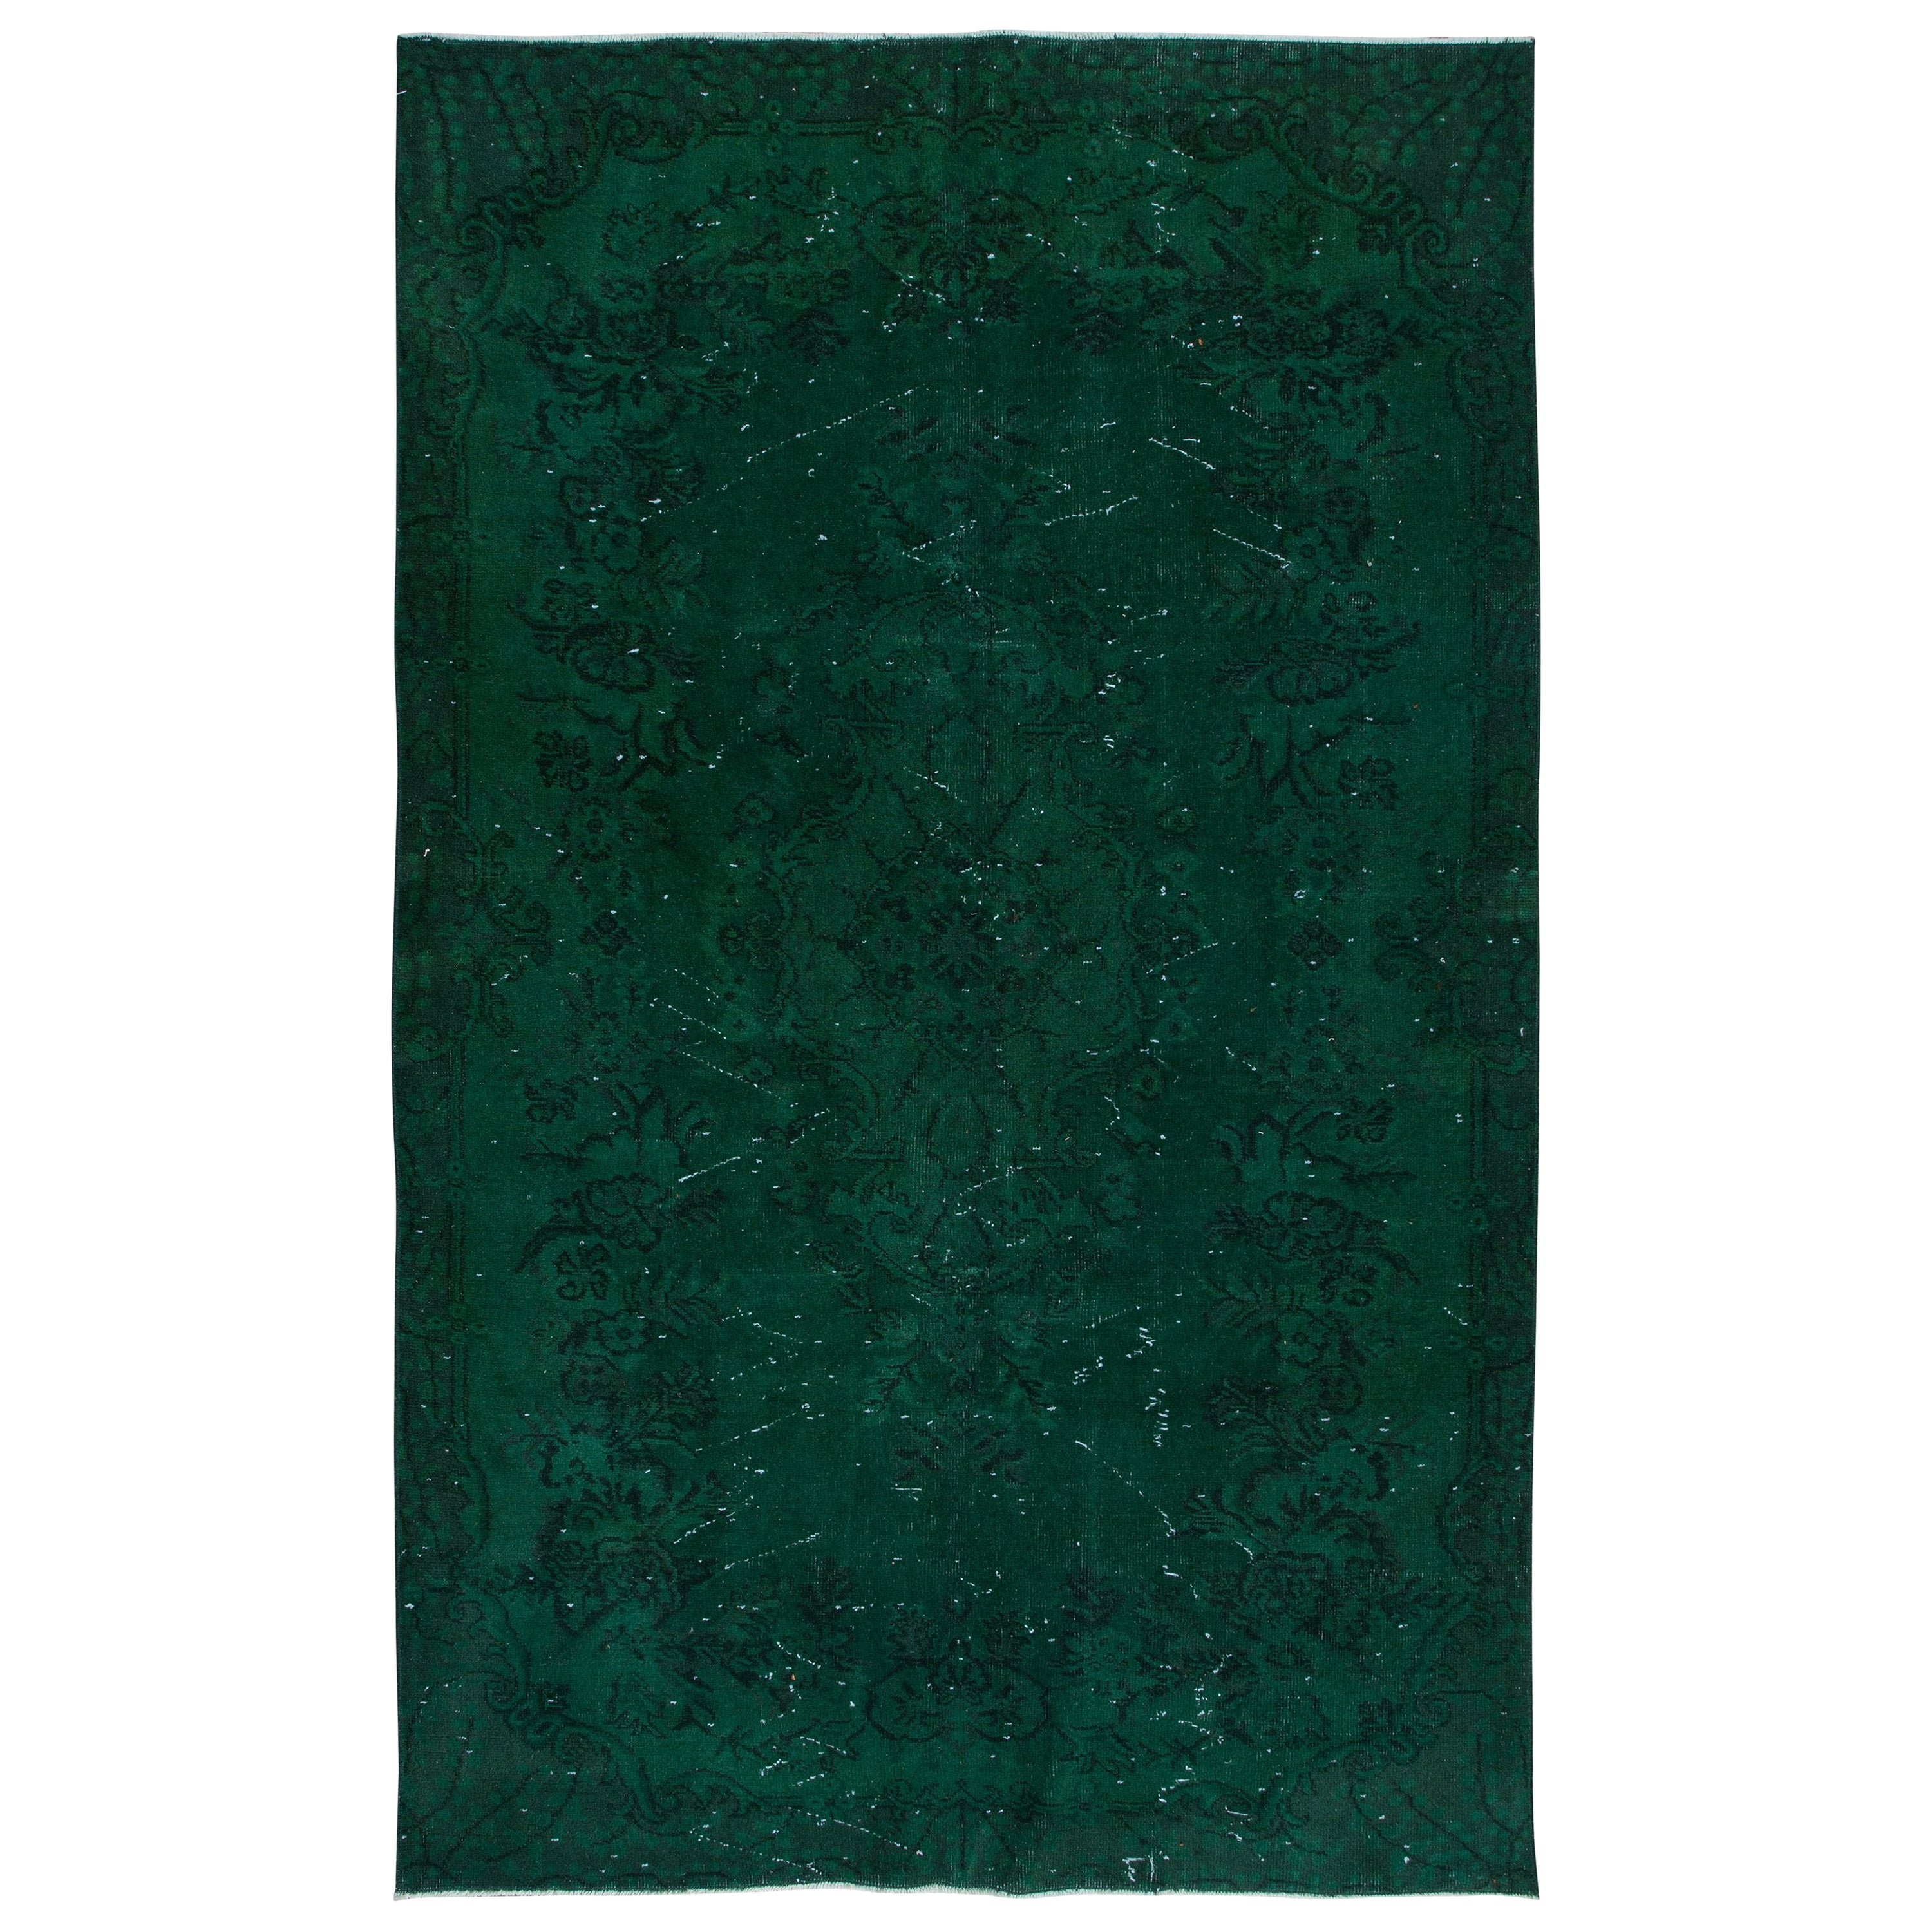 5.3x8.3 Ft Hand-Made Central Anatolian Area Rug in Forest Green, Modern Carpet For Sale